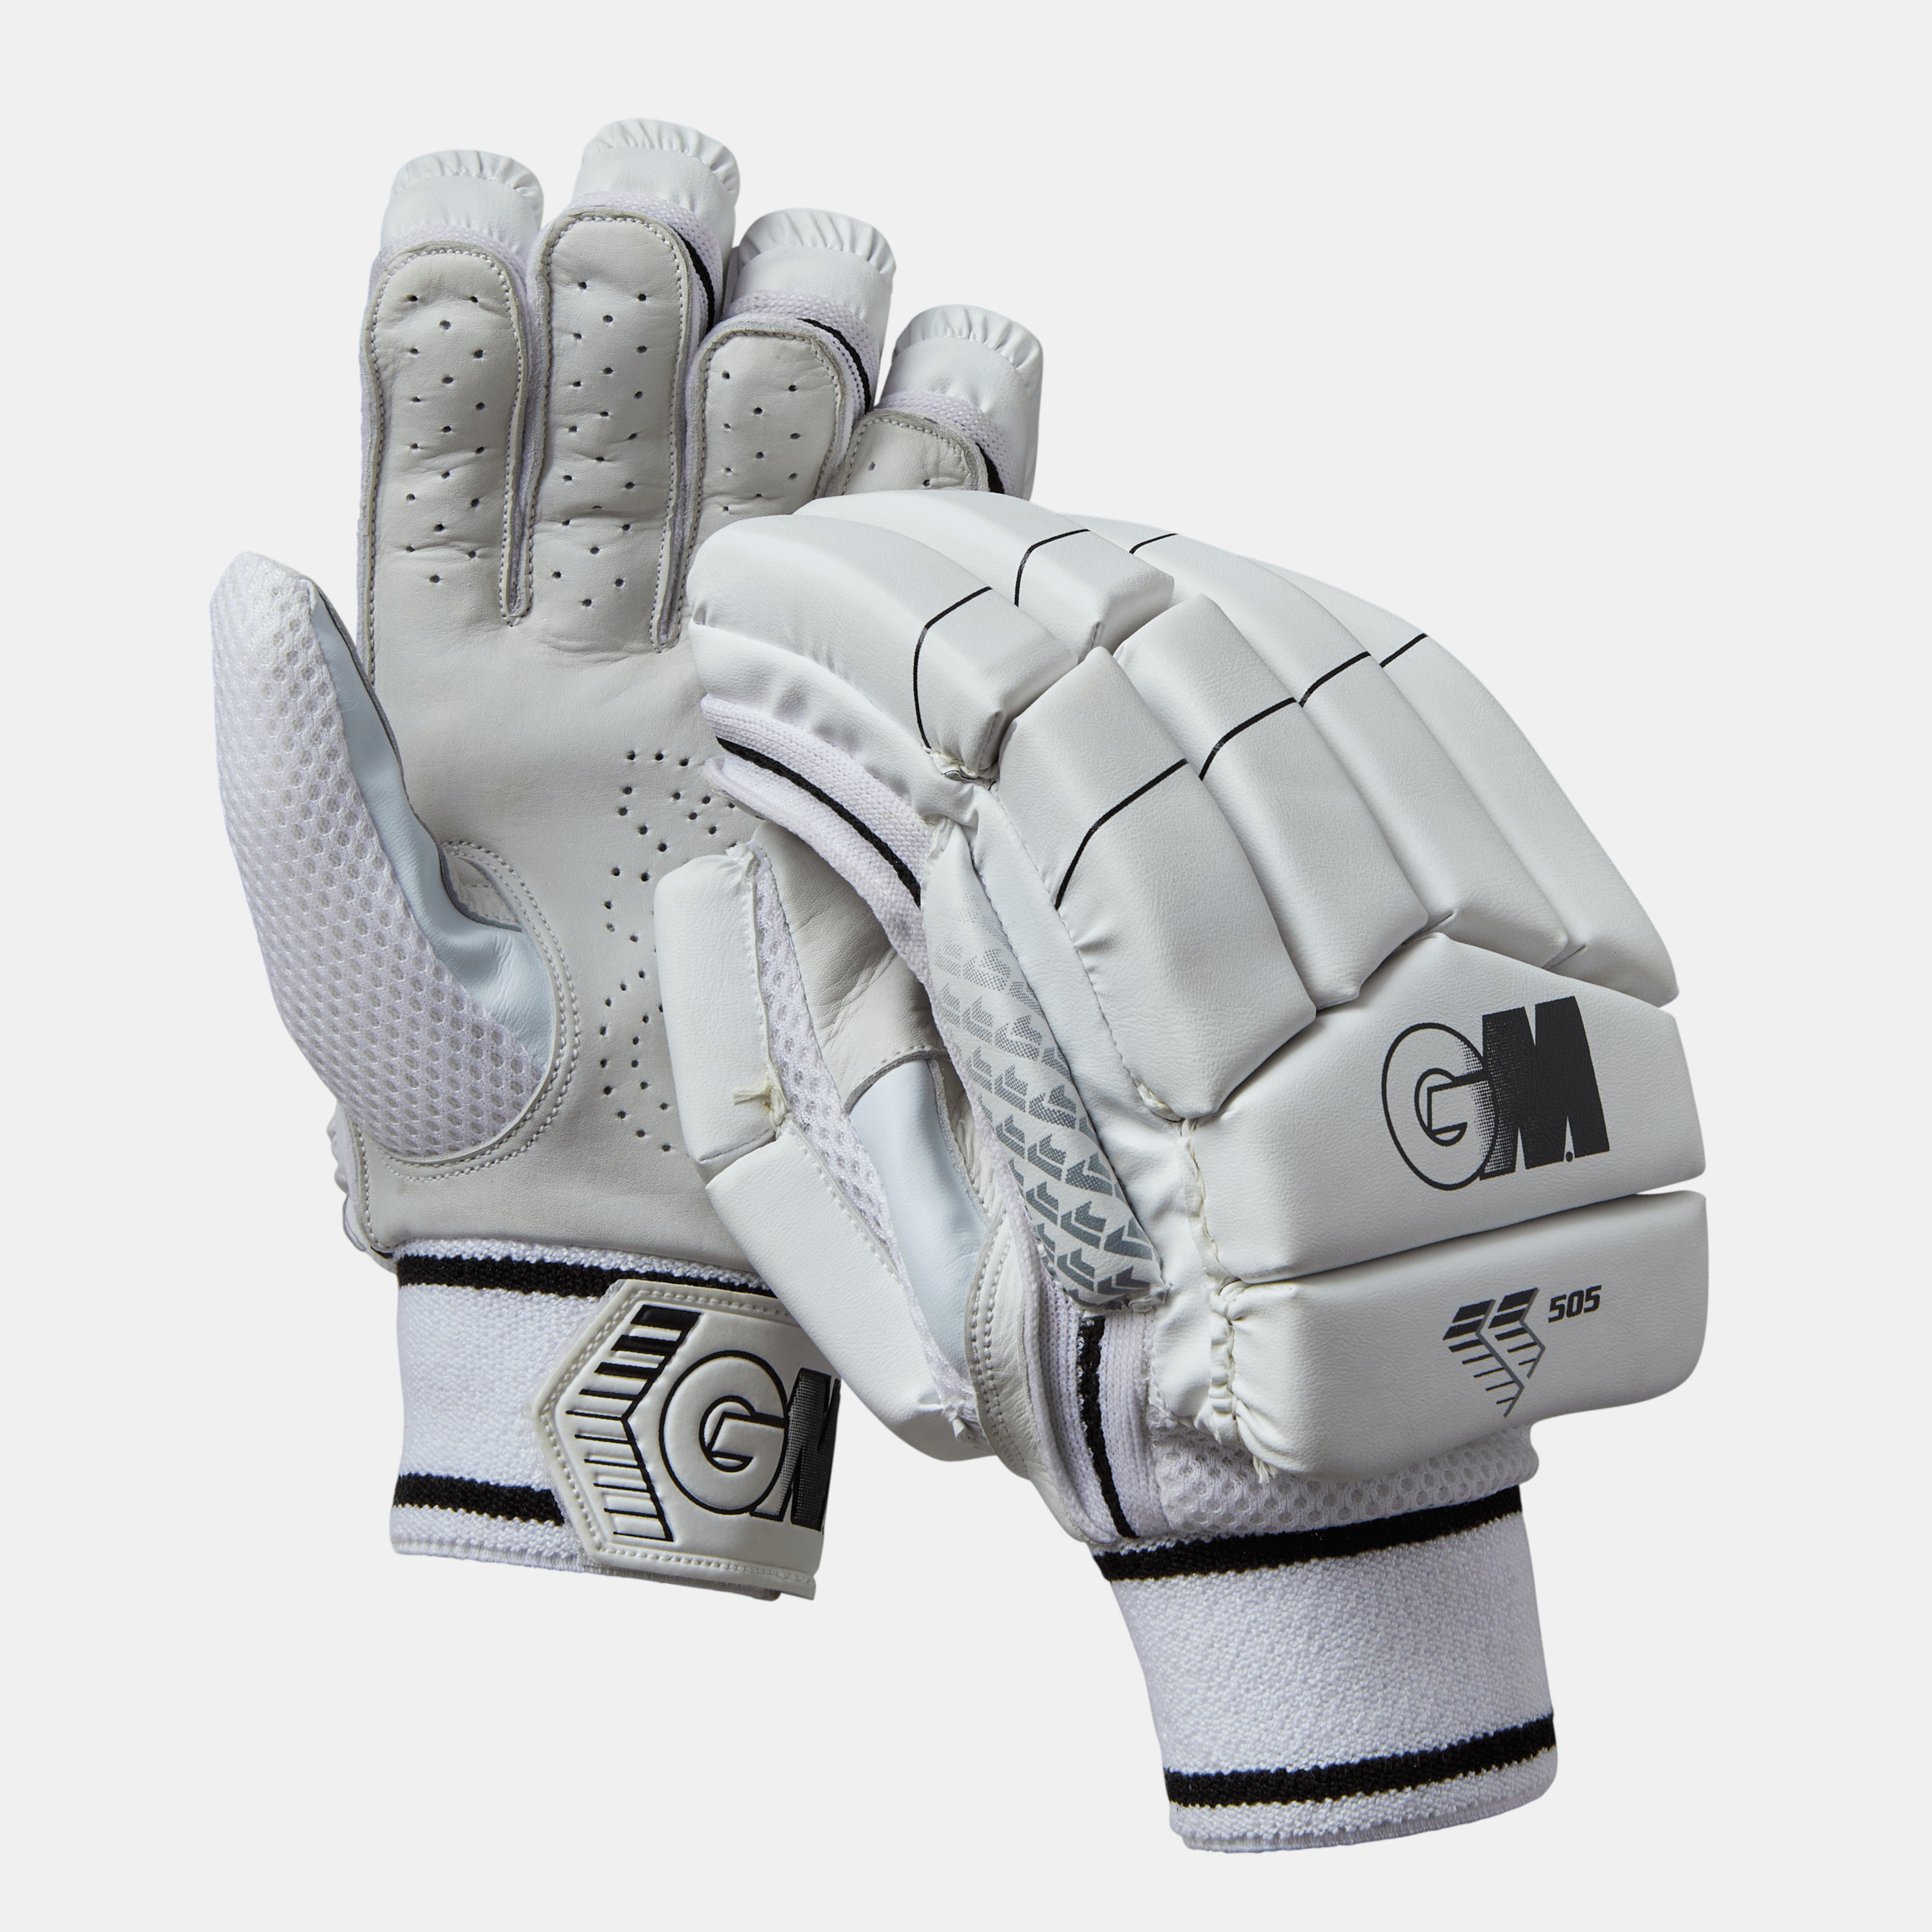 GM 505 Cricket Batting Gloves - SMALL ADULT - AT Sports